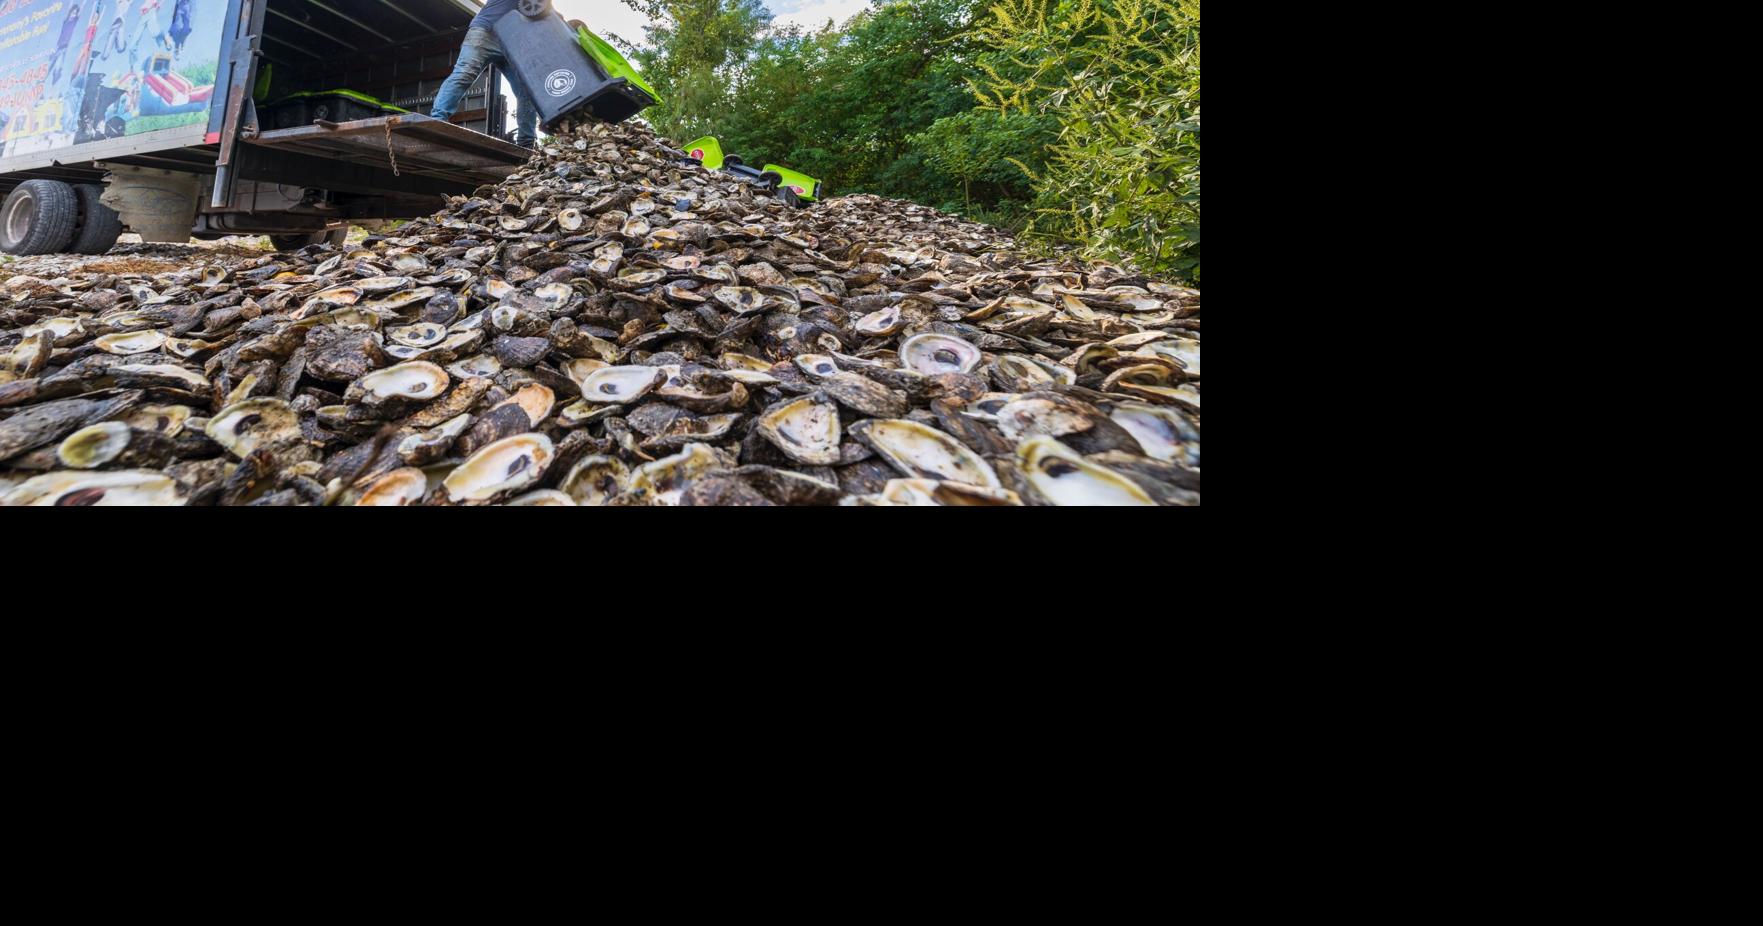 Millions of pounds of oyster shells are being recycled to help restore the Louisiana coast